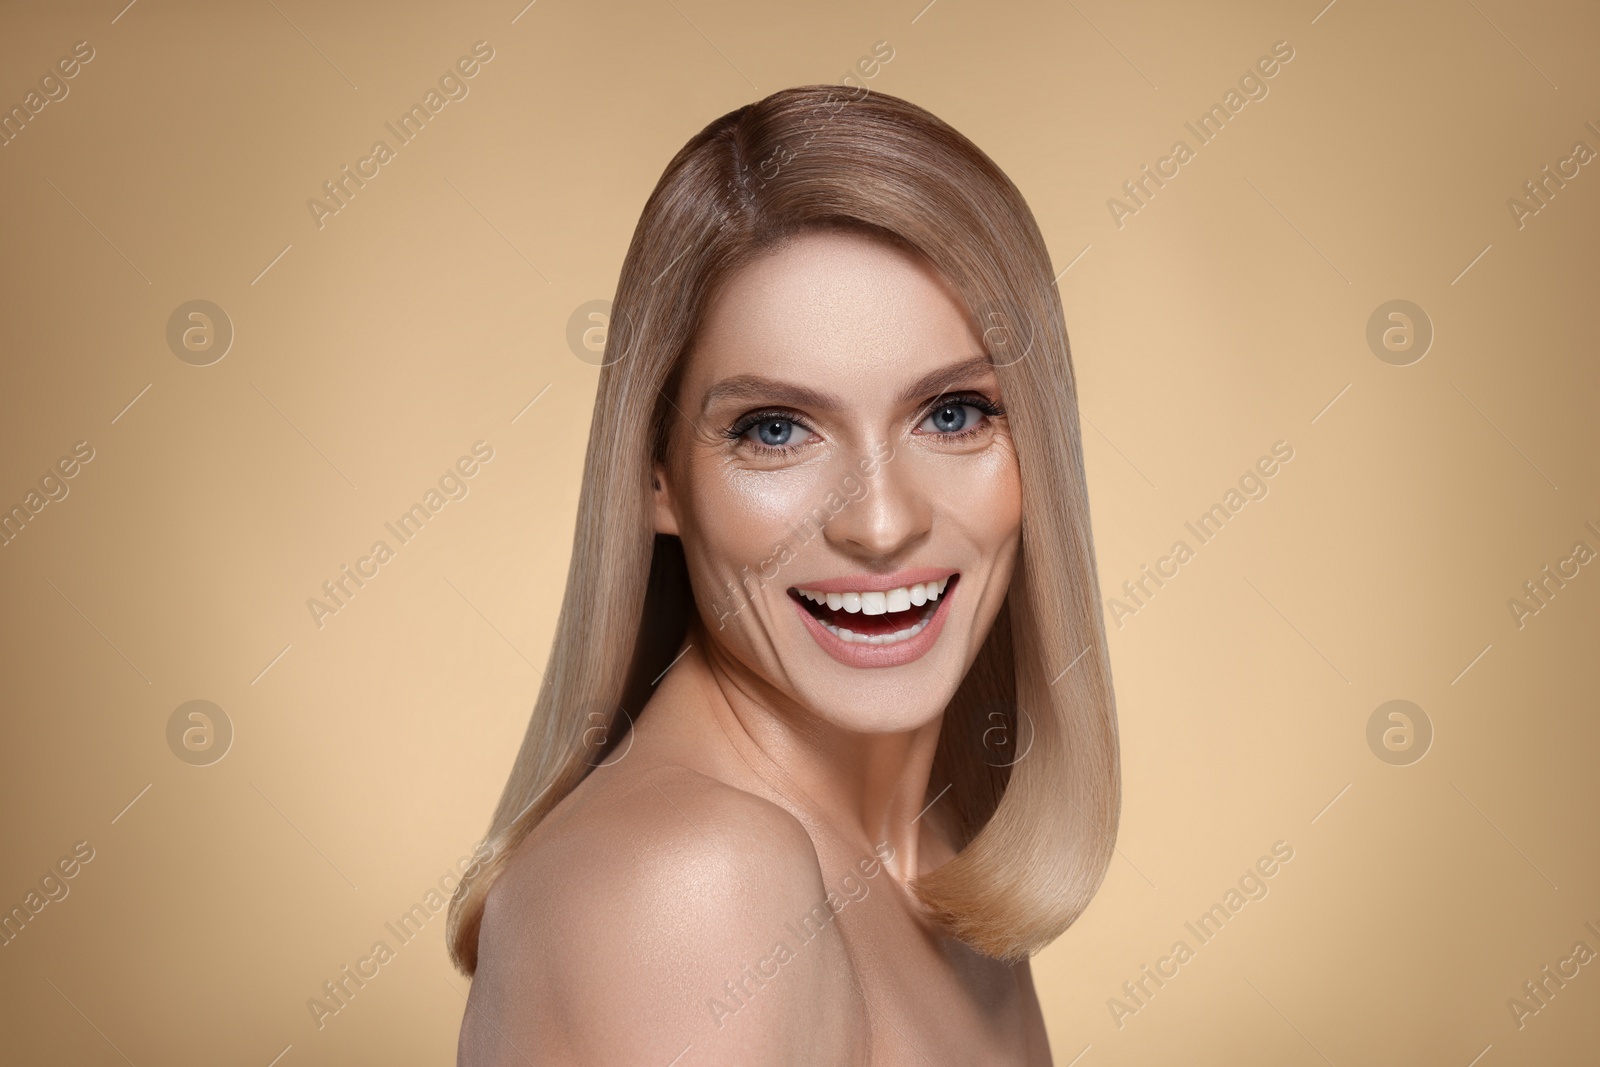 Image of Portrait of attractive woman with blonde hair smiling on dark beige background